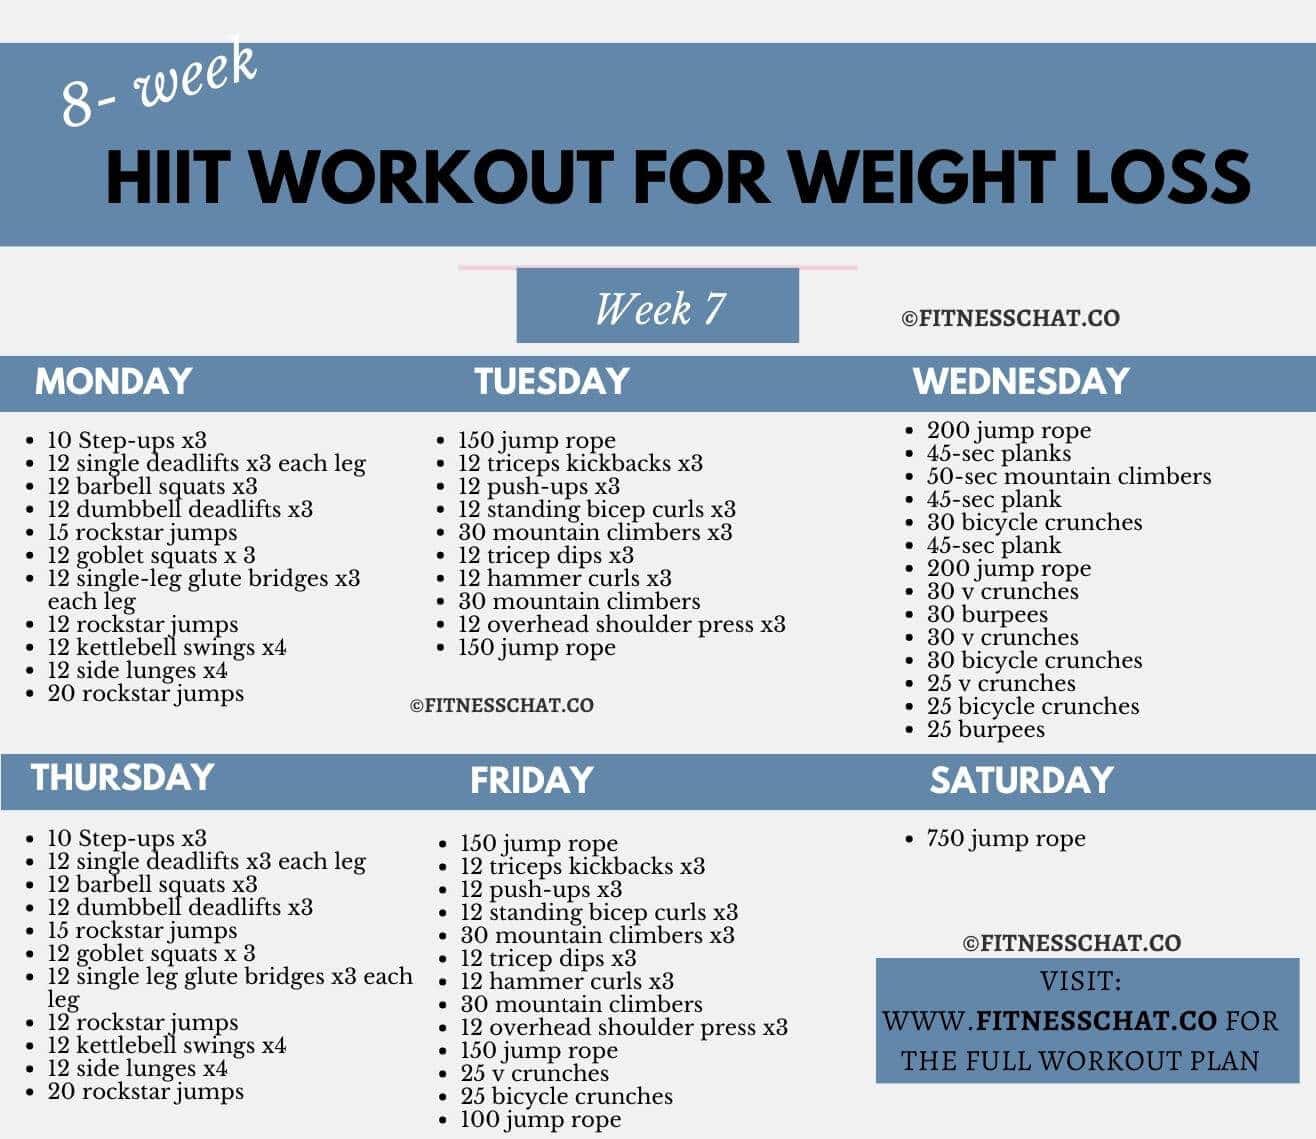 hiit workout for weight loss week 7